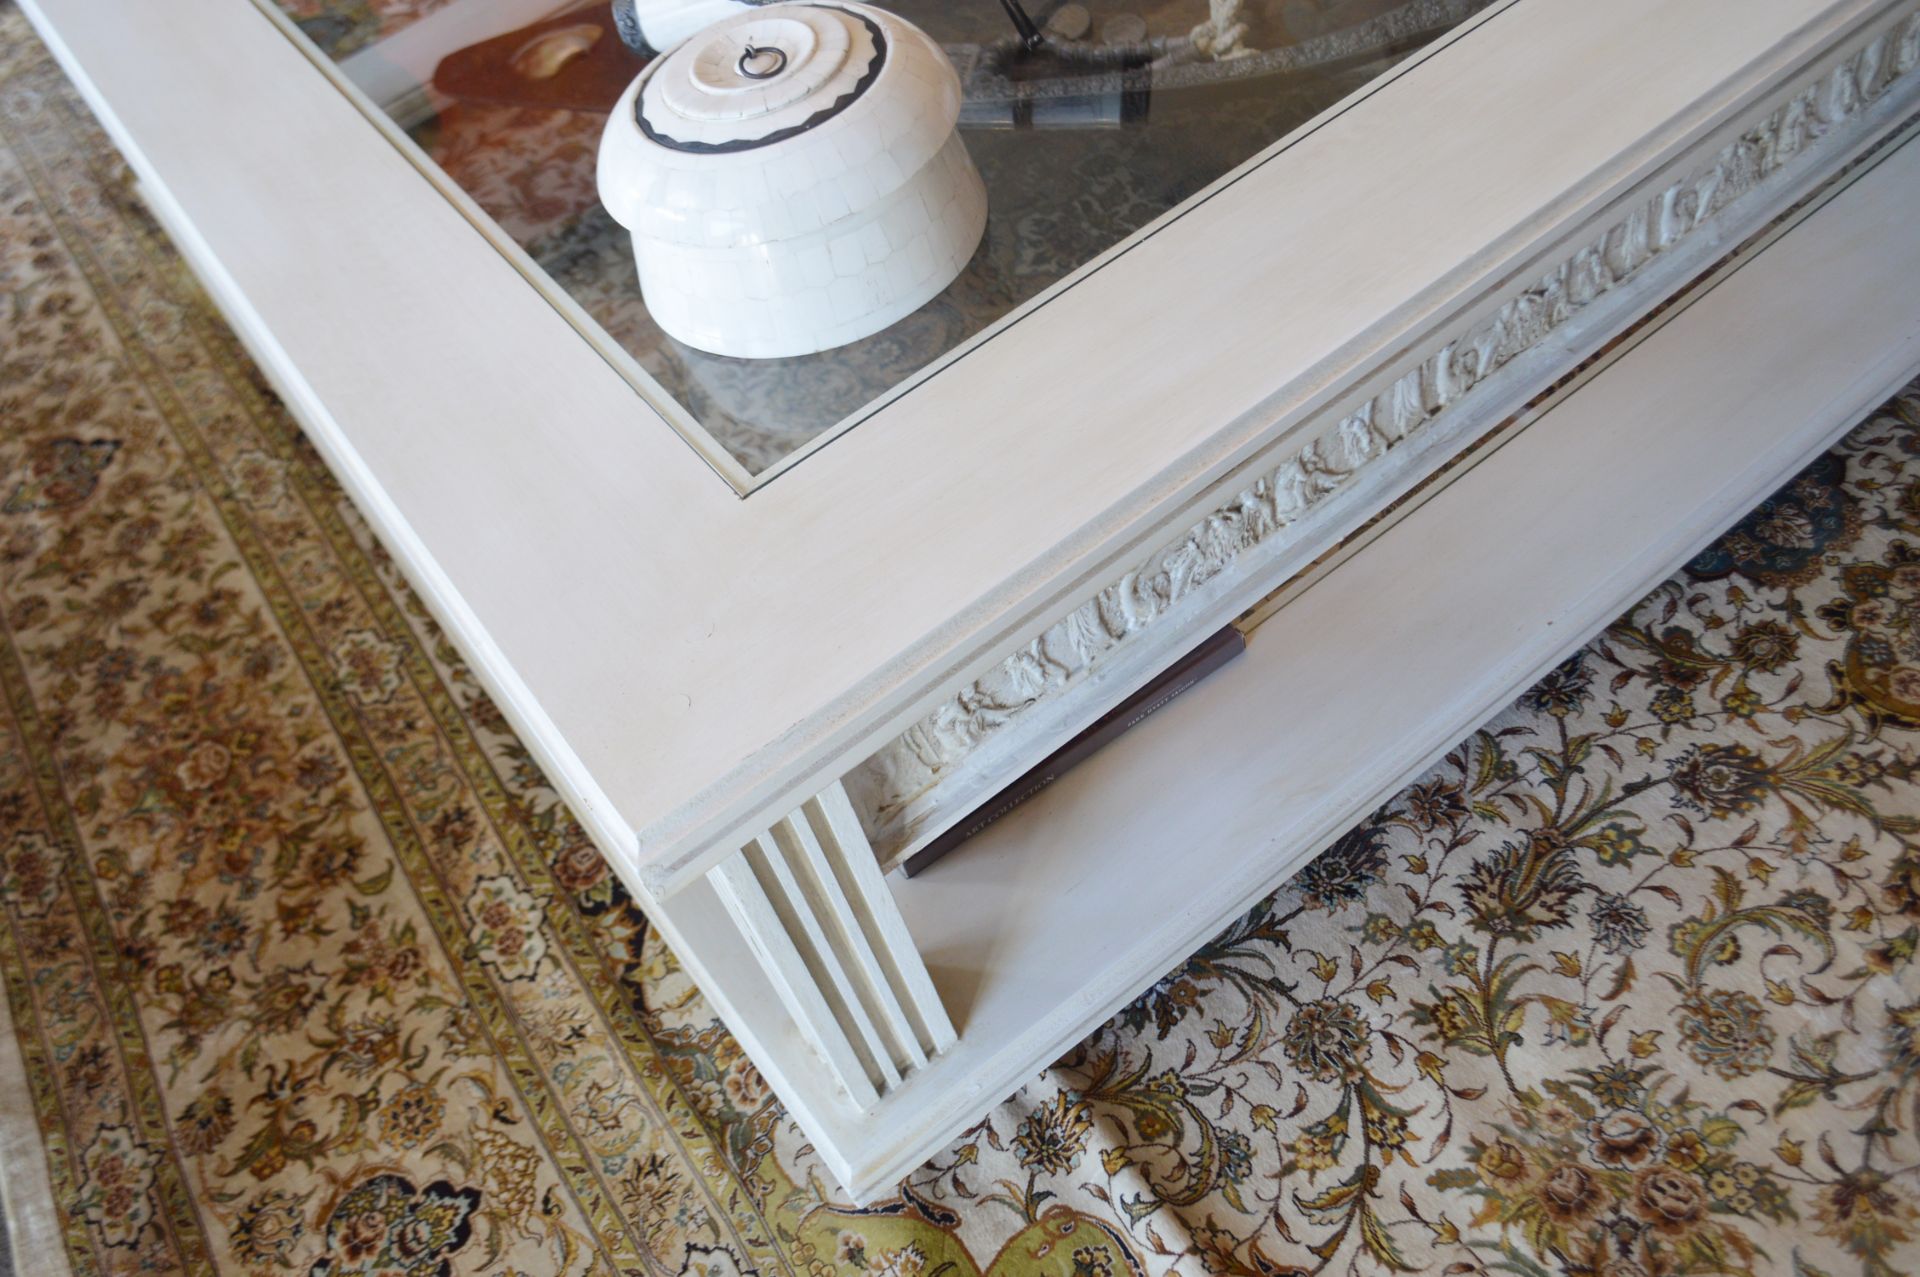 1 x Wooden Coffee Table With Glass Middle  To be removed from a Exclusive Property In Bowdon  - - Image 2 of 3